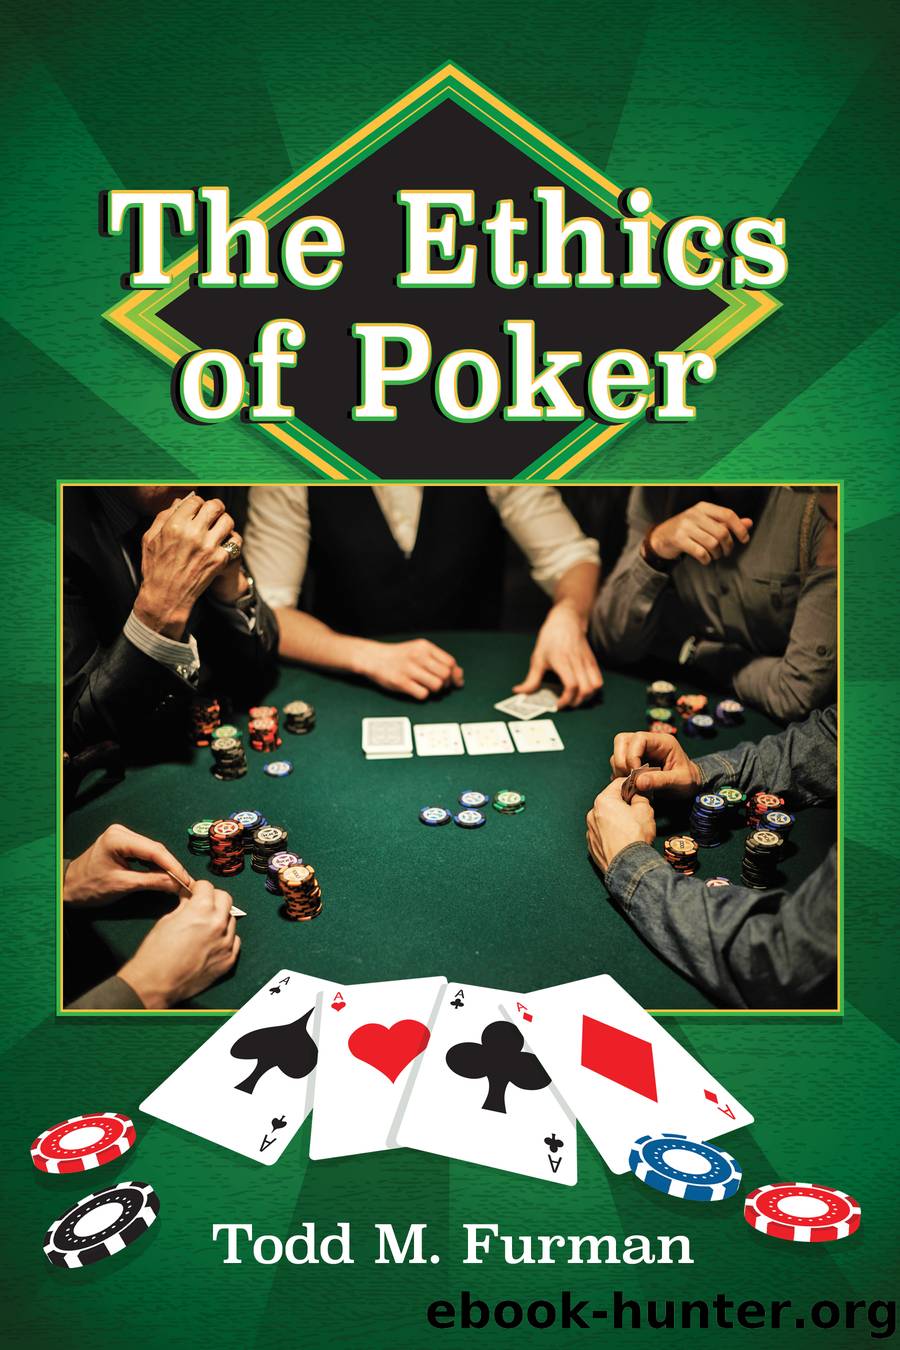 The Ethics of Poker by Todd M. Furman